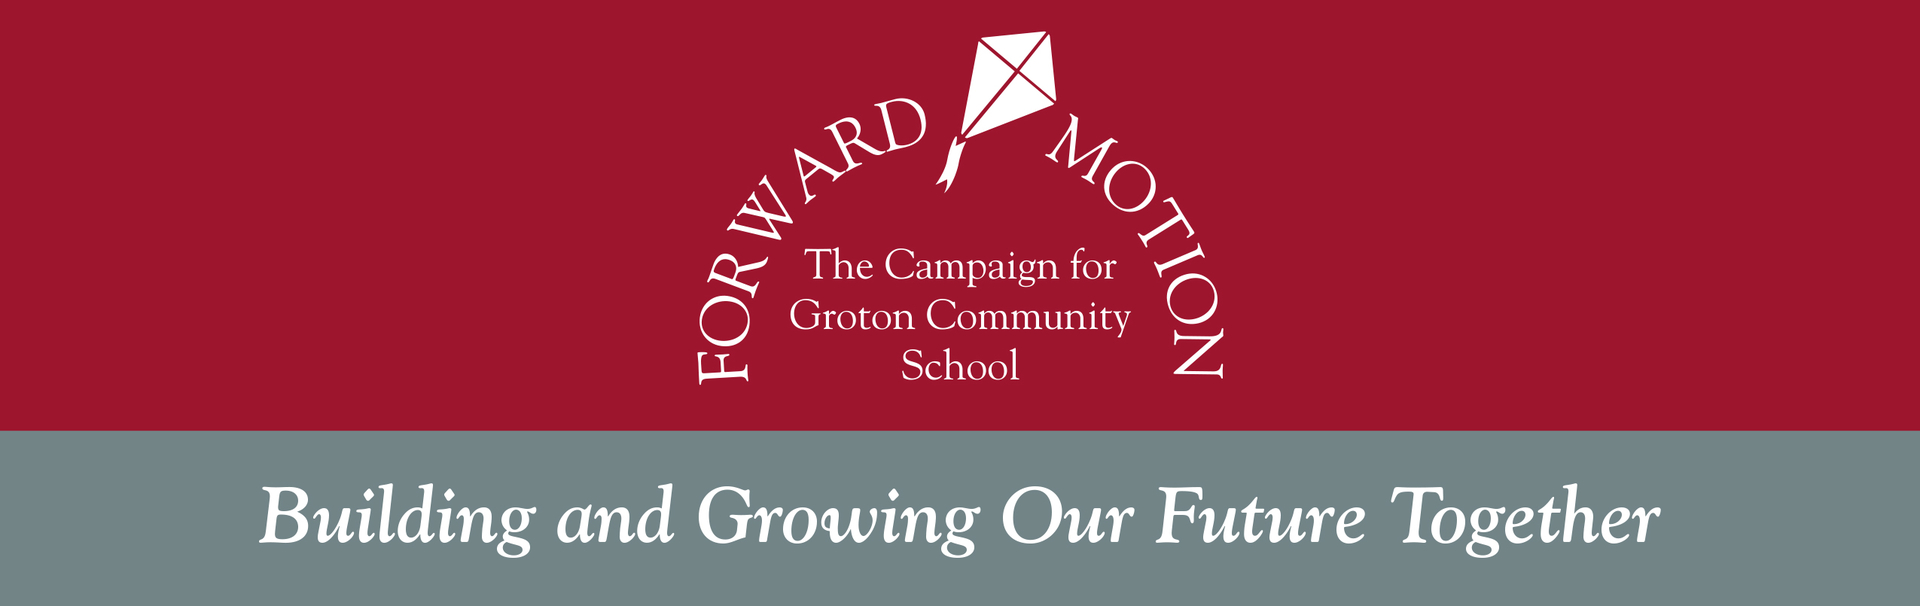 Forward Motion Campaign